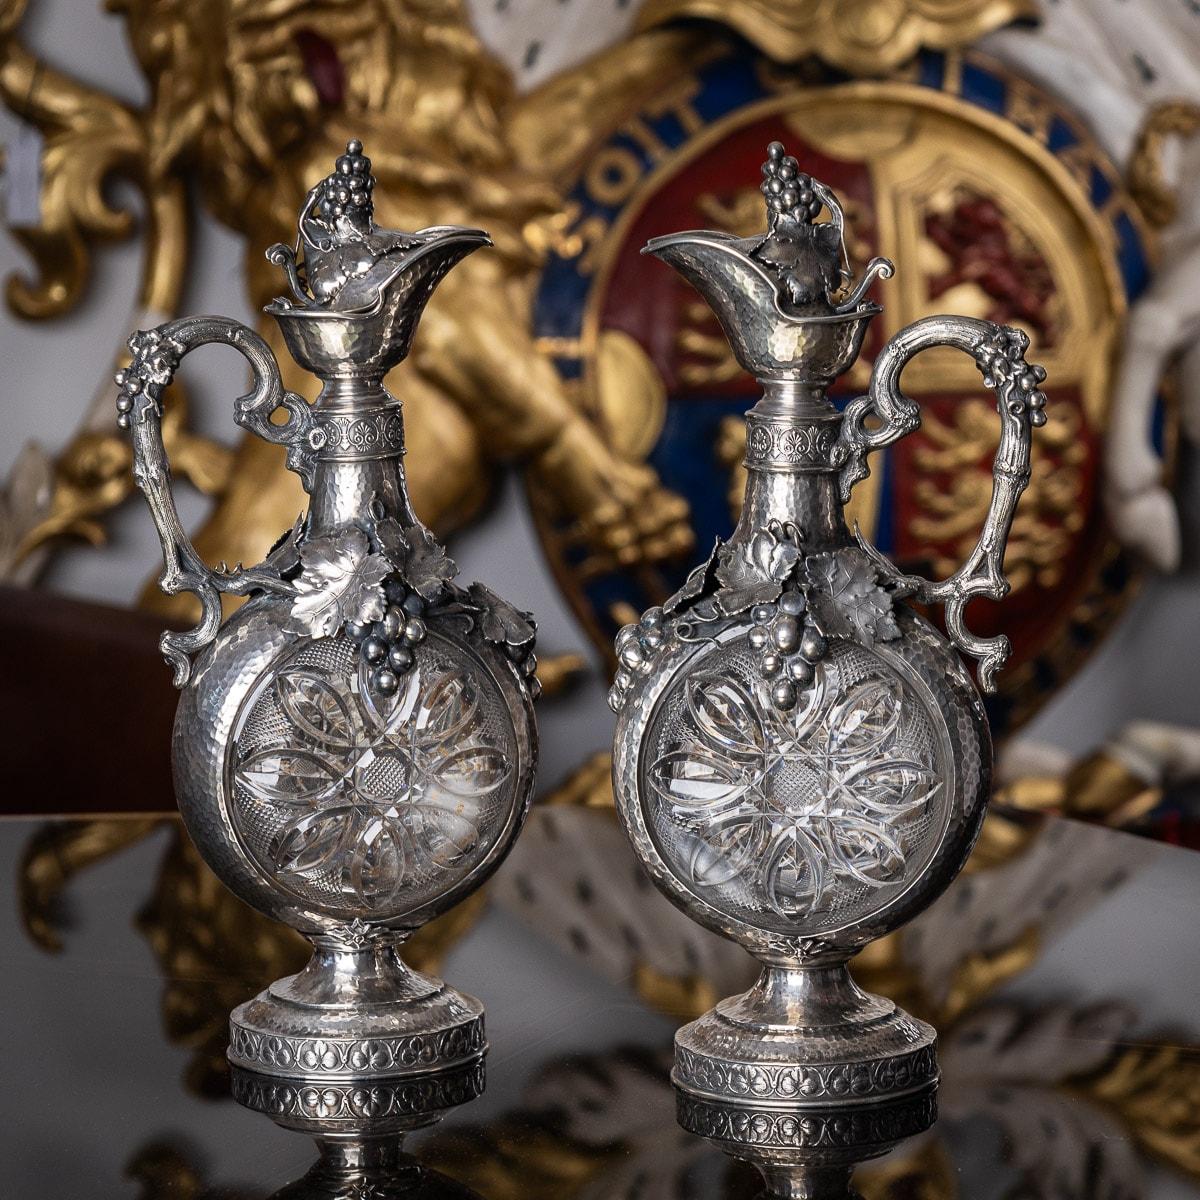 19th century pair of German silver mounted on glass wine jugs, magnificent and highly decorative, the clear-glass body beautifully cut, the silver mount applied with foliage and grapes, the handle is realistically modelled as grapevine, the body